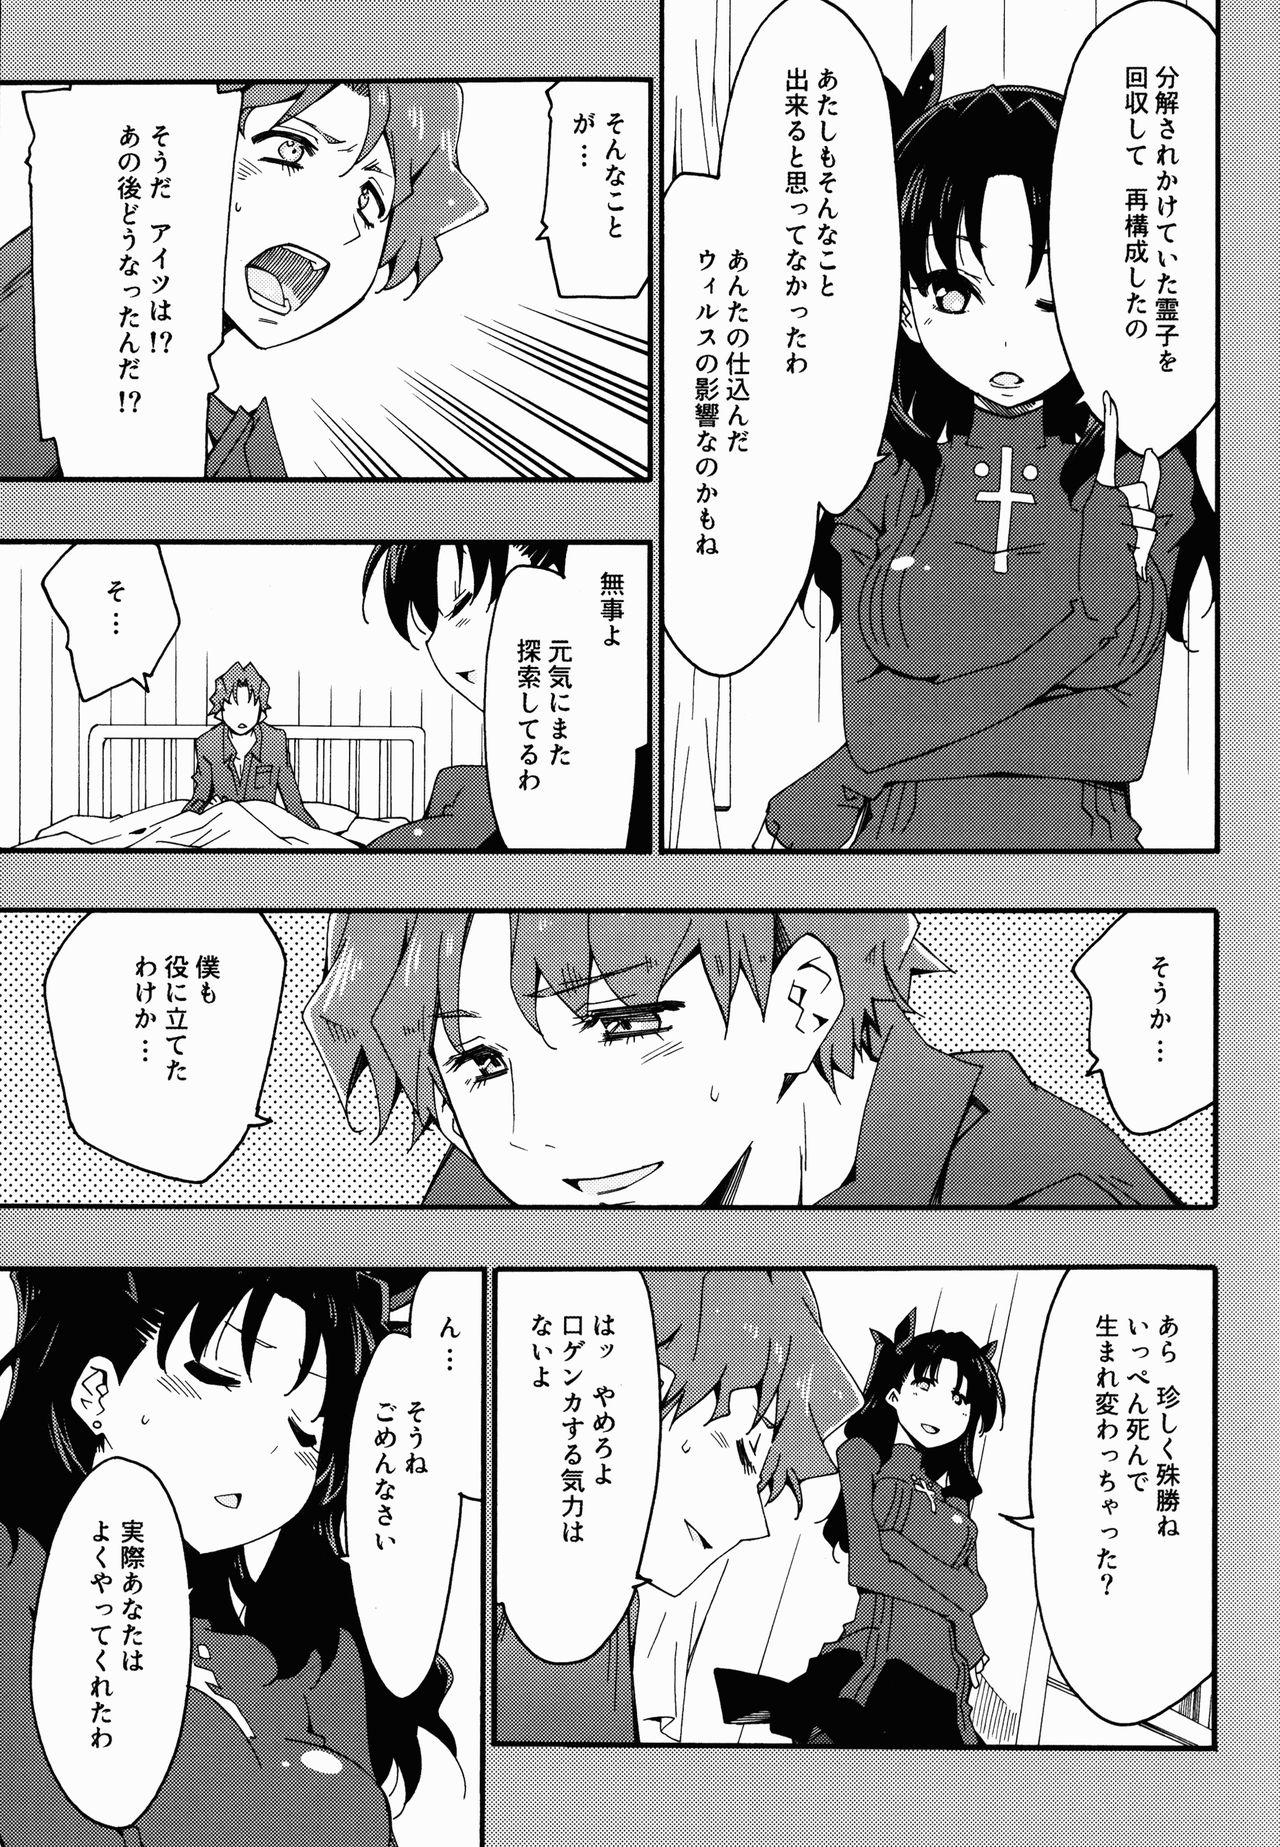 Infiel Melty/kiss - Fate extra Interview - Page 7